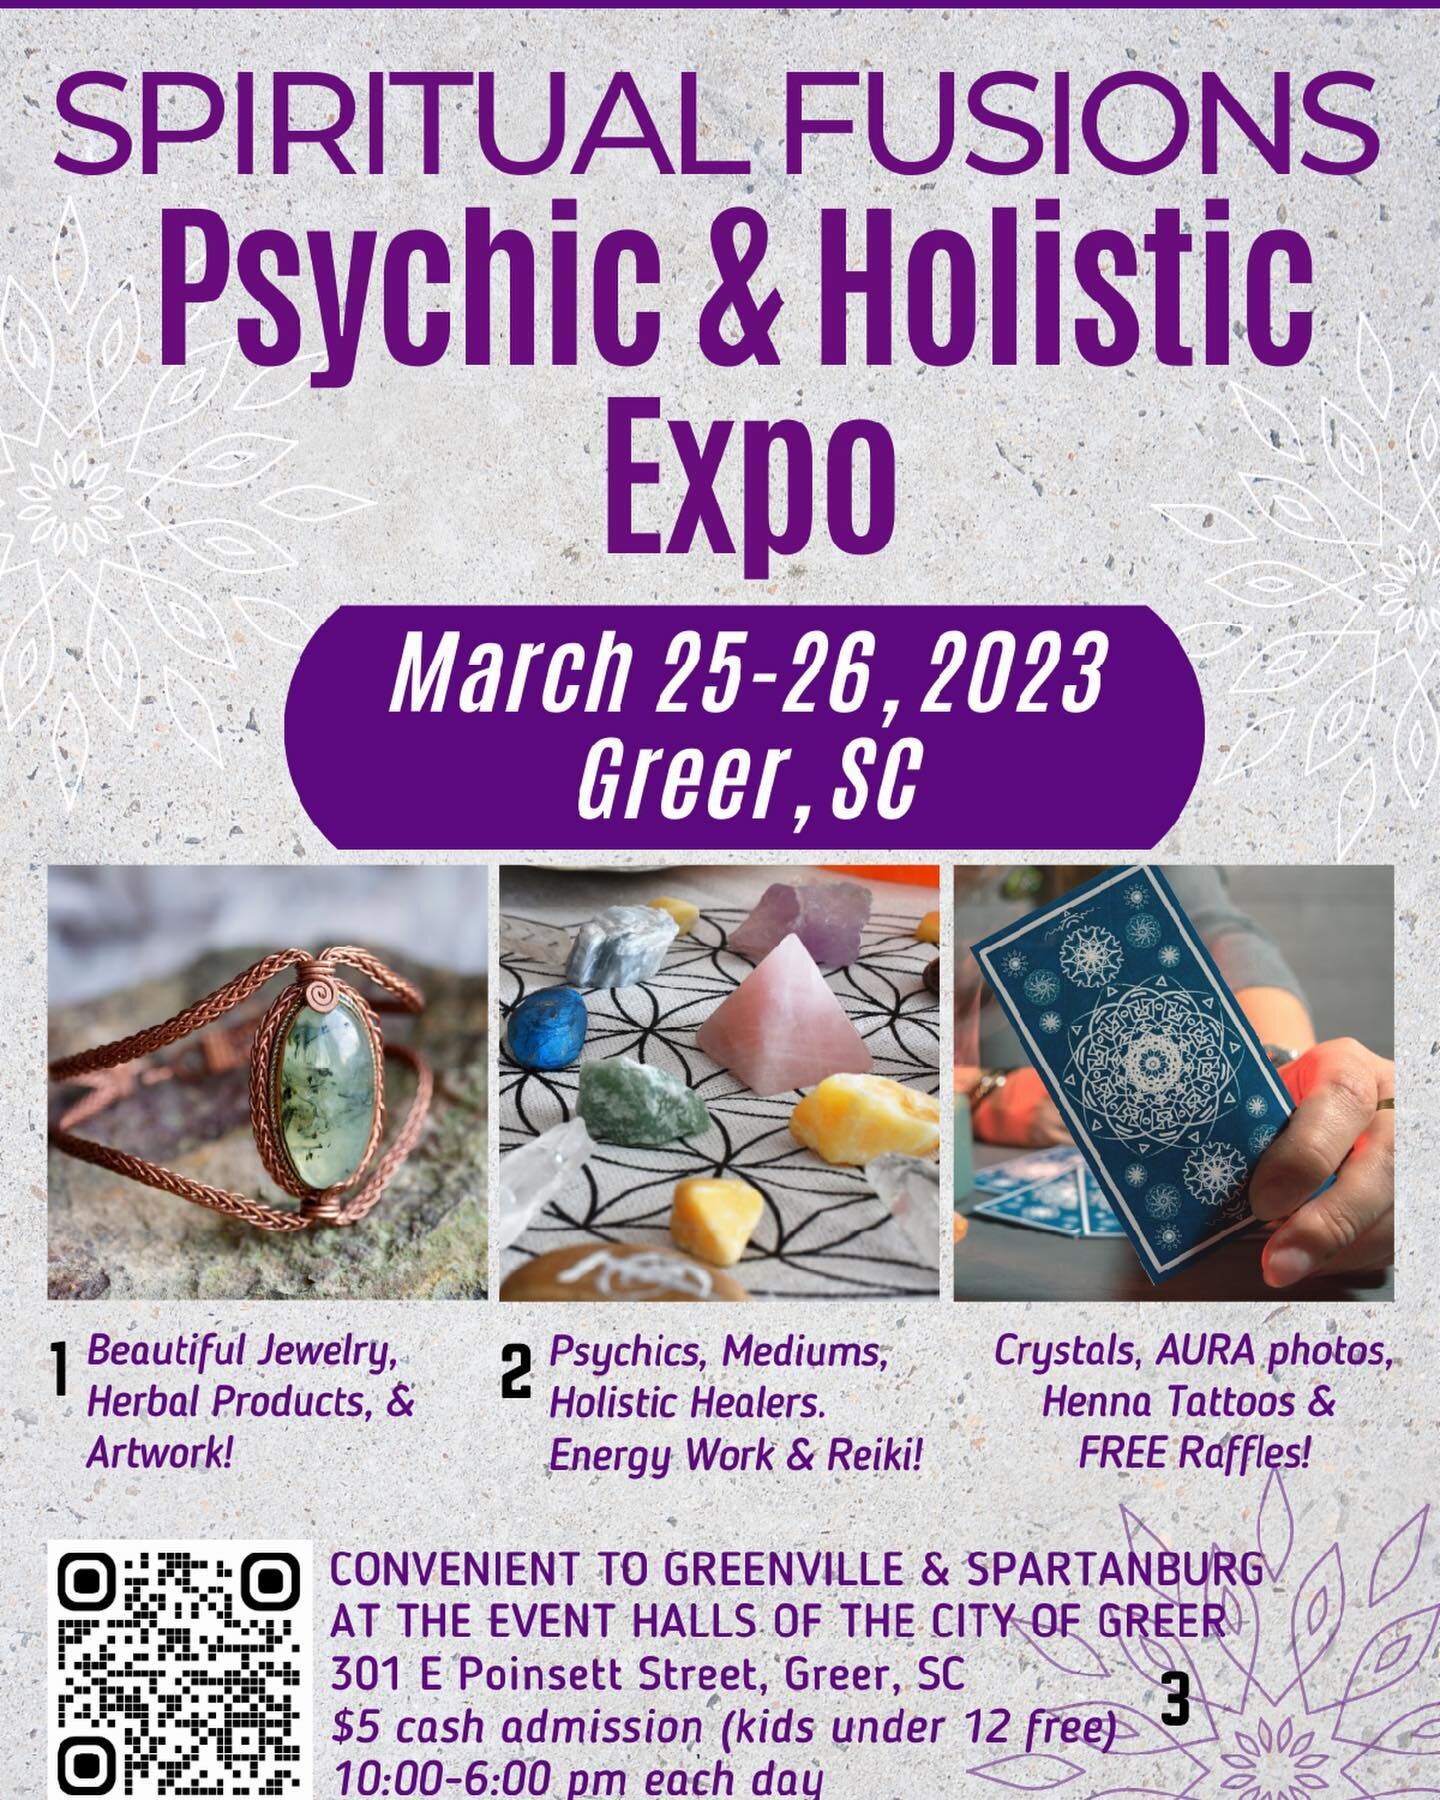 This weekend I&rsquo;m excited to be vending @spiritualfusions Spiritual Fusions Psychic and Holistic Expo I. Greer, SC! I&rsquo;ll have @soulloveconnections Soul Love Intention Candles, Body Butter, and Bath Soaks all Reiki charged, and Crystal Infu